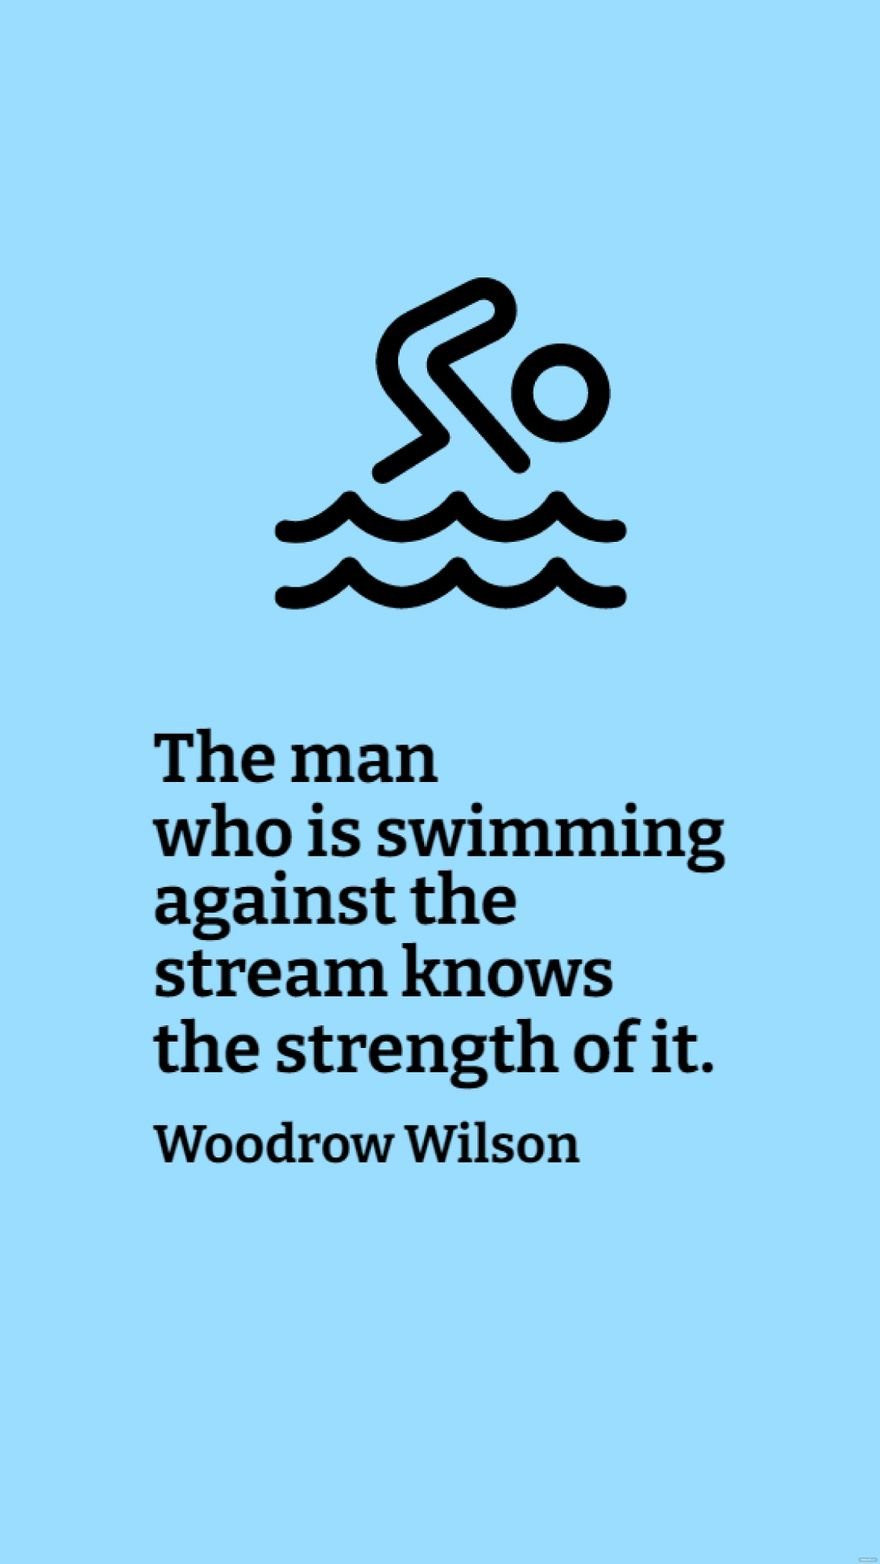 Woodrow Wilson - The man who is swimming against the stream knows the strength of it.